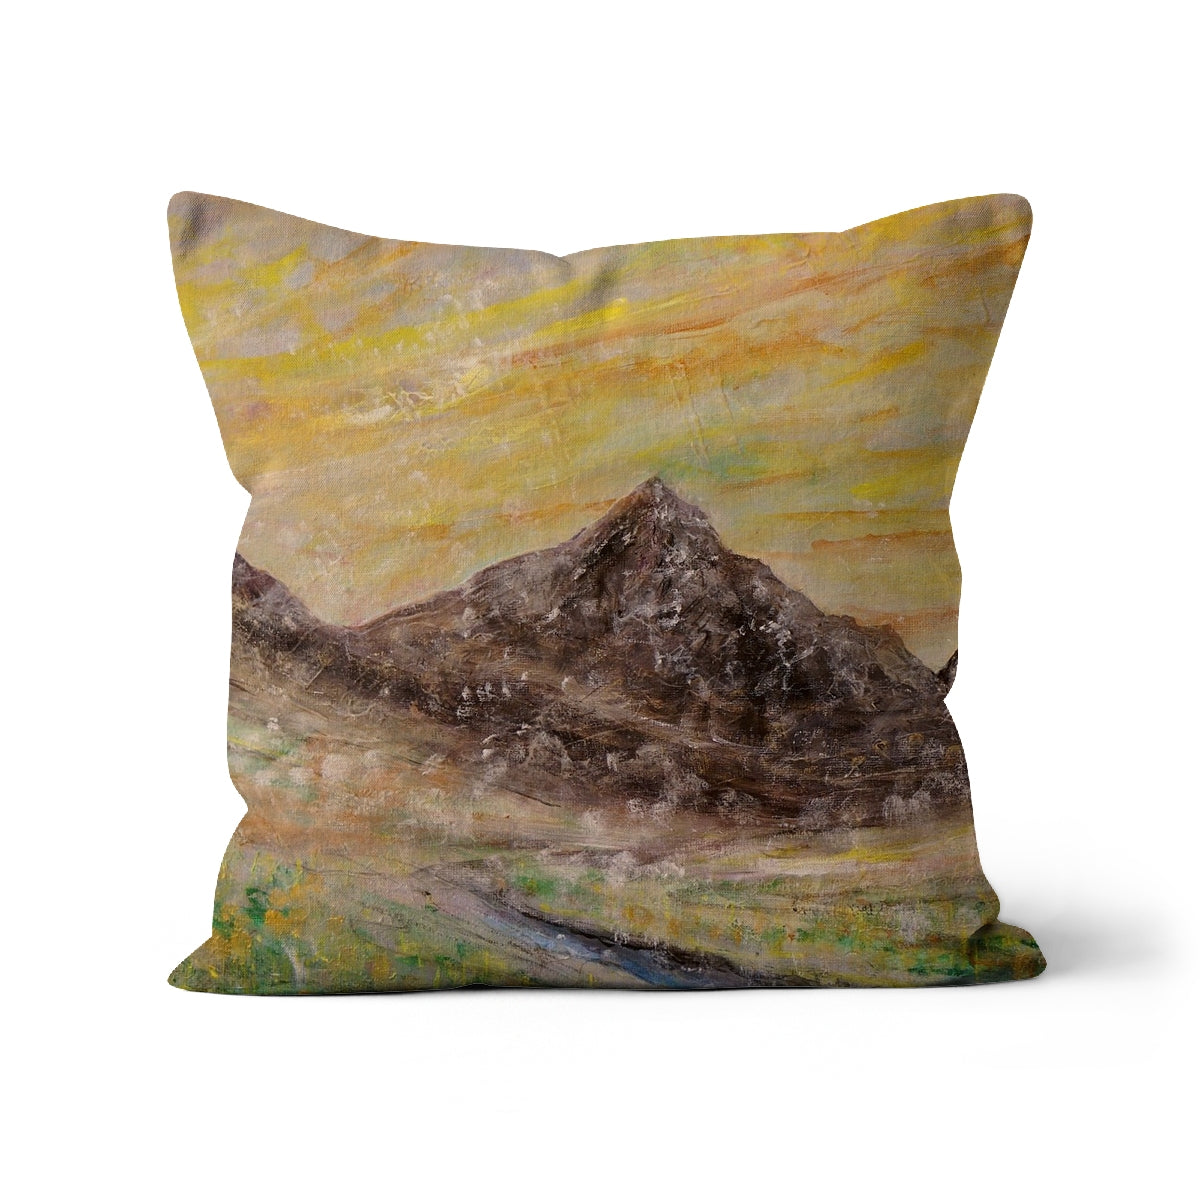 Glen Rosa Mist Arran Art Gifts Cushion-Cushions-Arran Art Gallery-Faux Suede-16"x16"-Paintings, Prints, Homeware, Art Gifts From Scotland By Scottish Artist Kevin Hunter